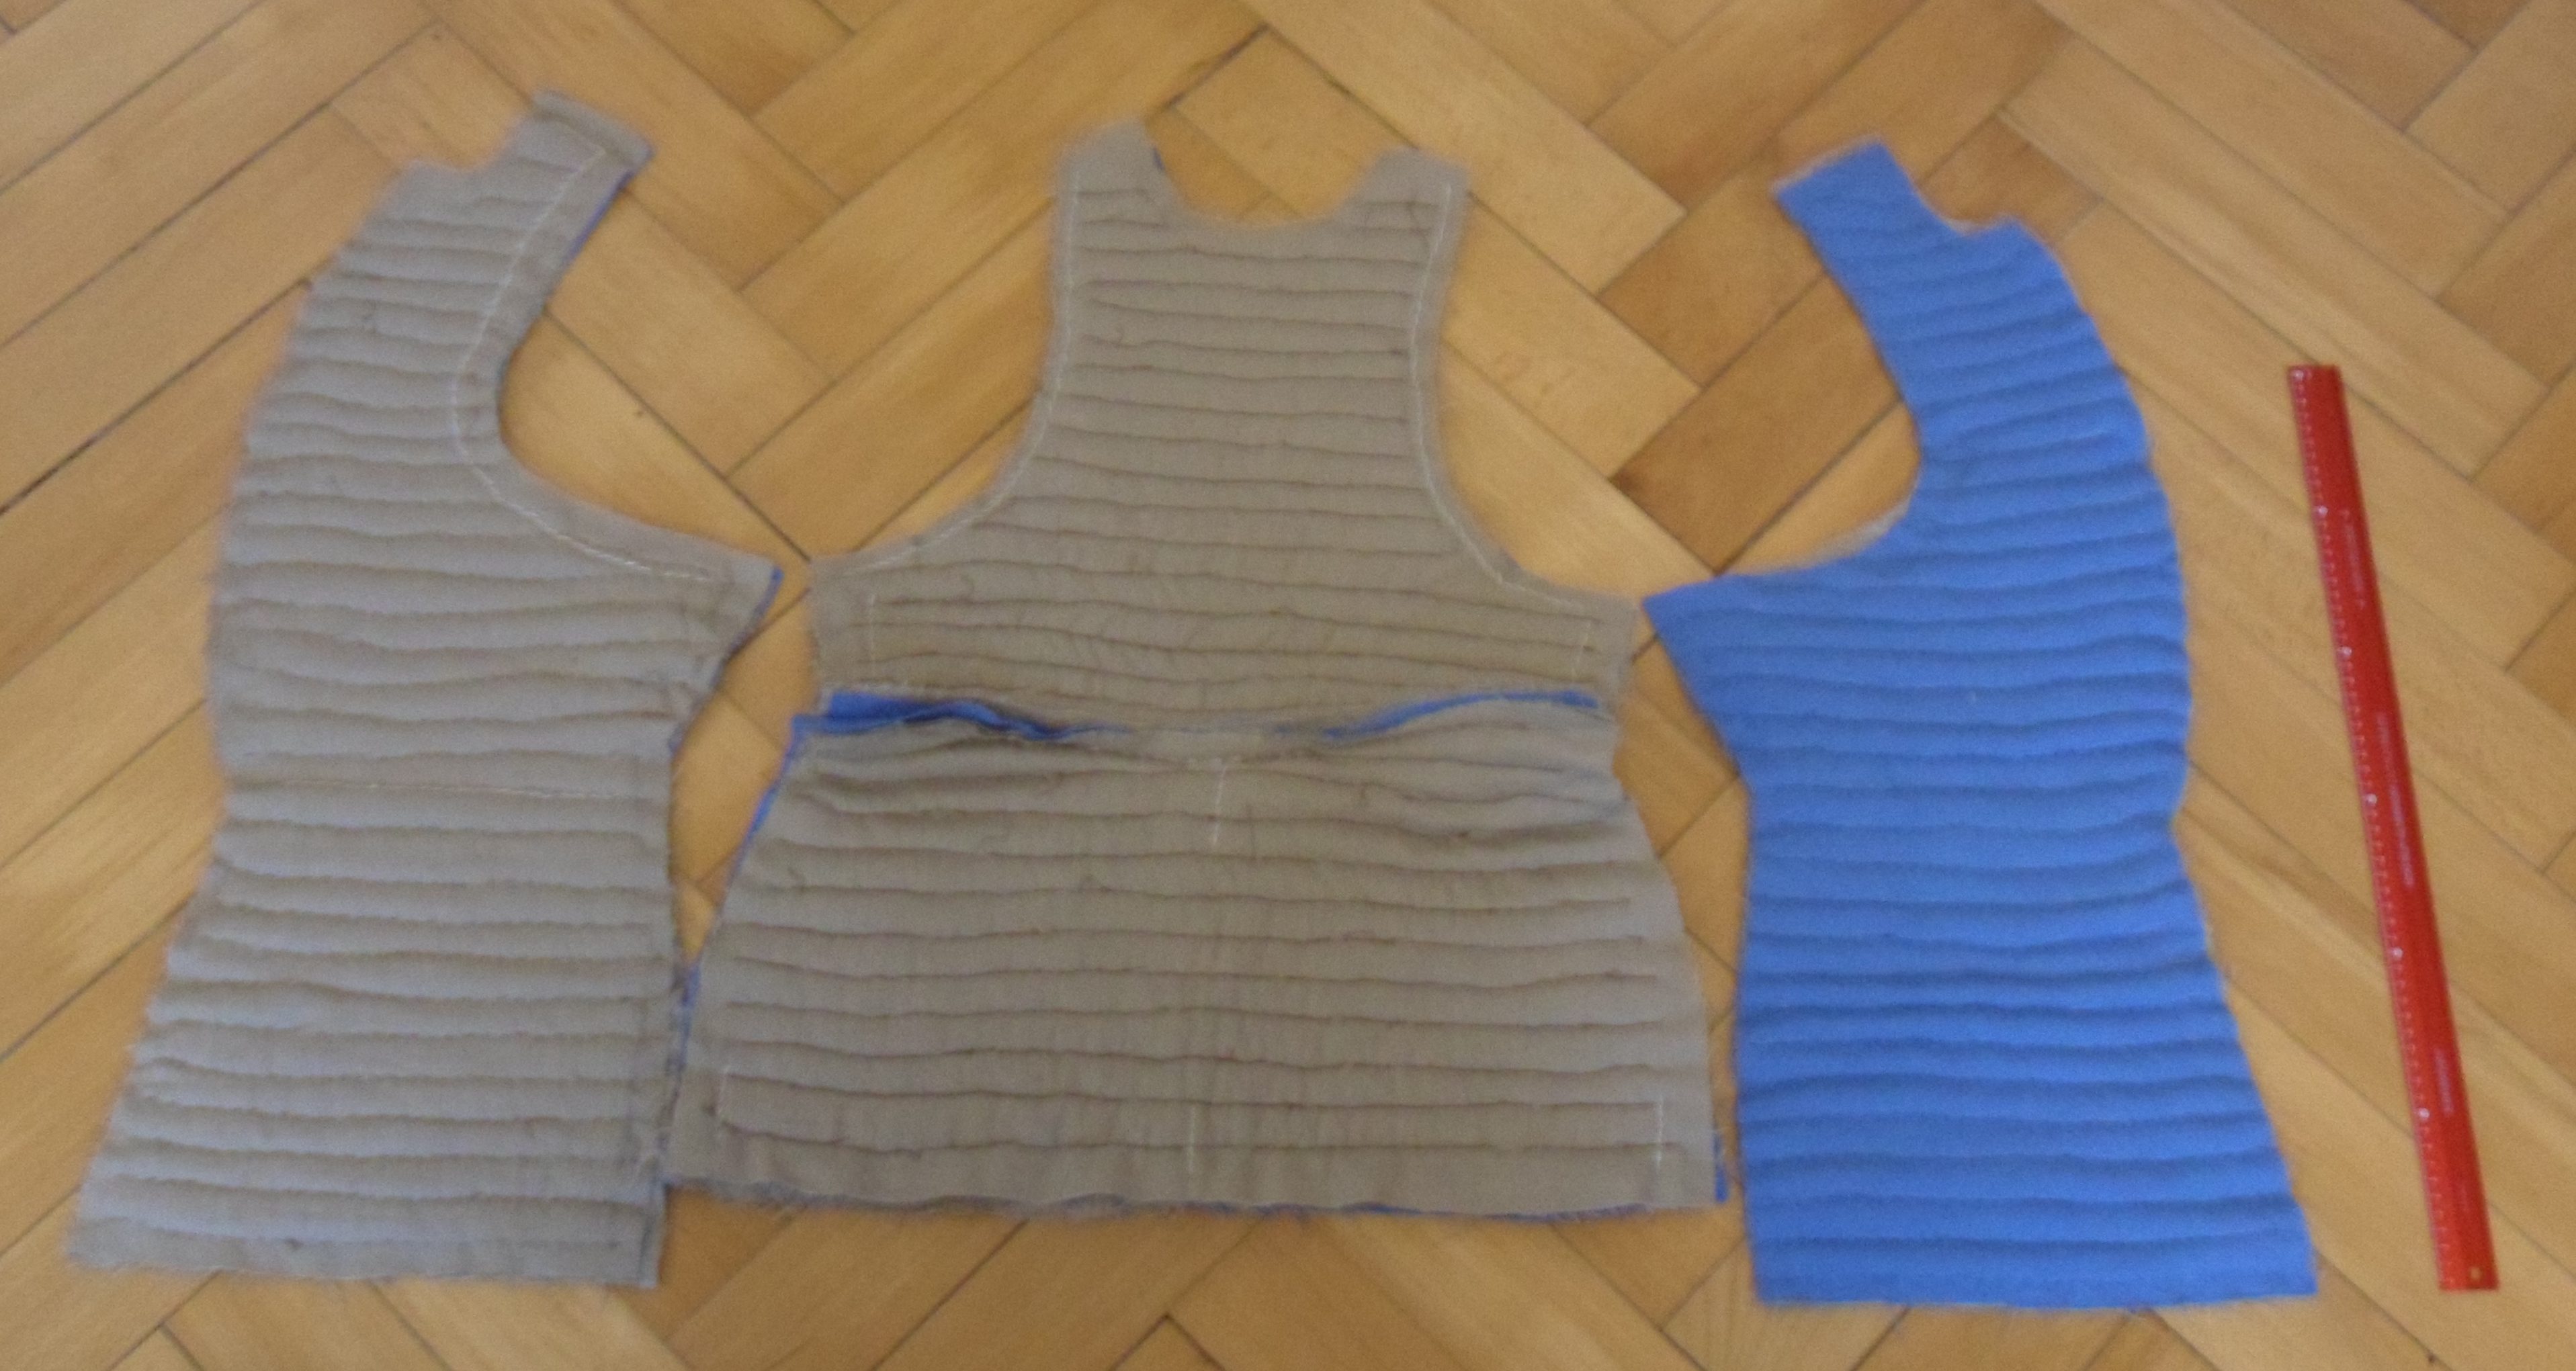 Components of a quilted doublet spread on the floor showing that one breast has blue cloth on the inside and one has brown there